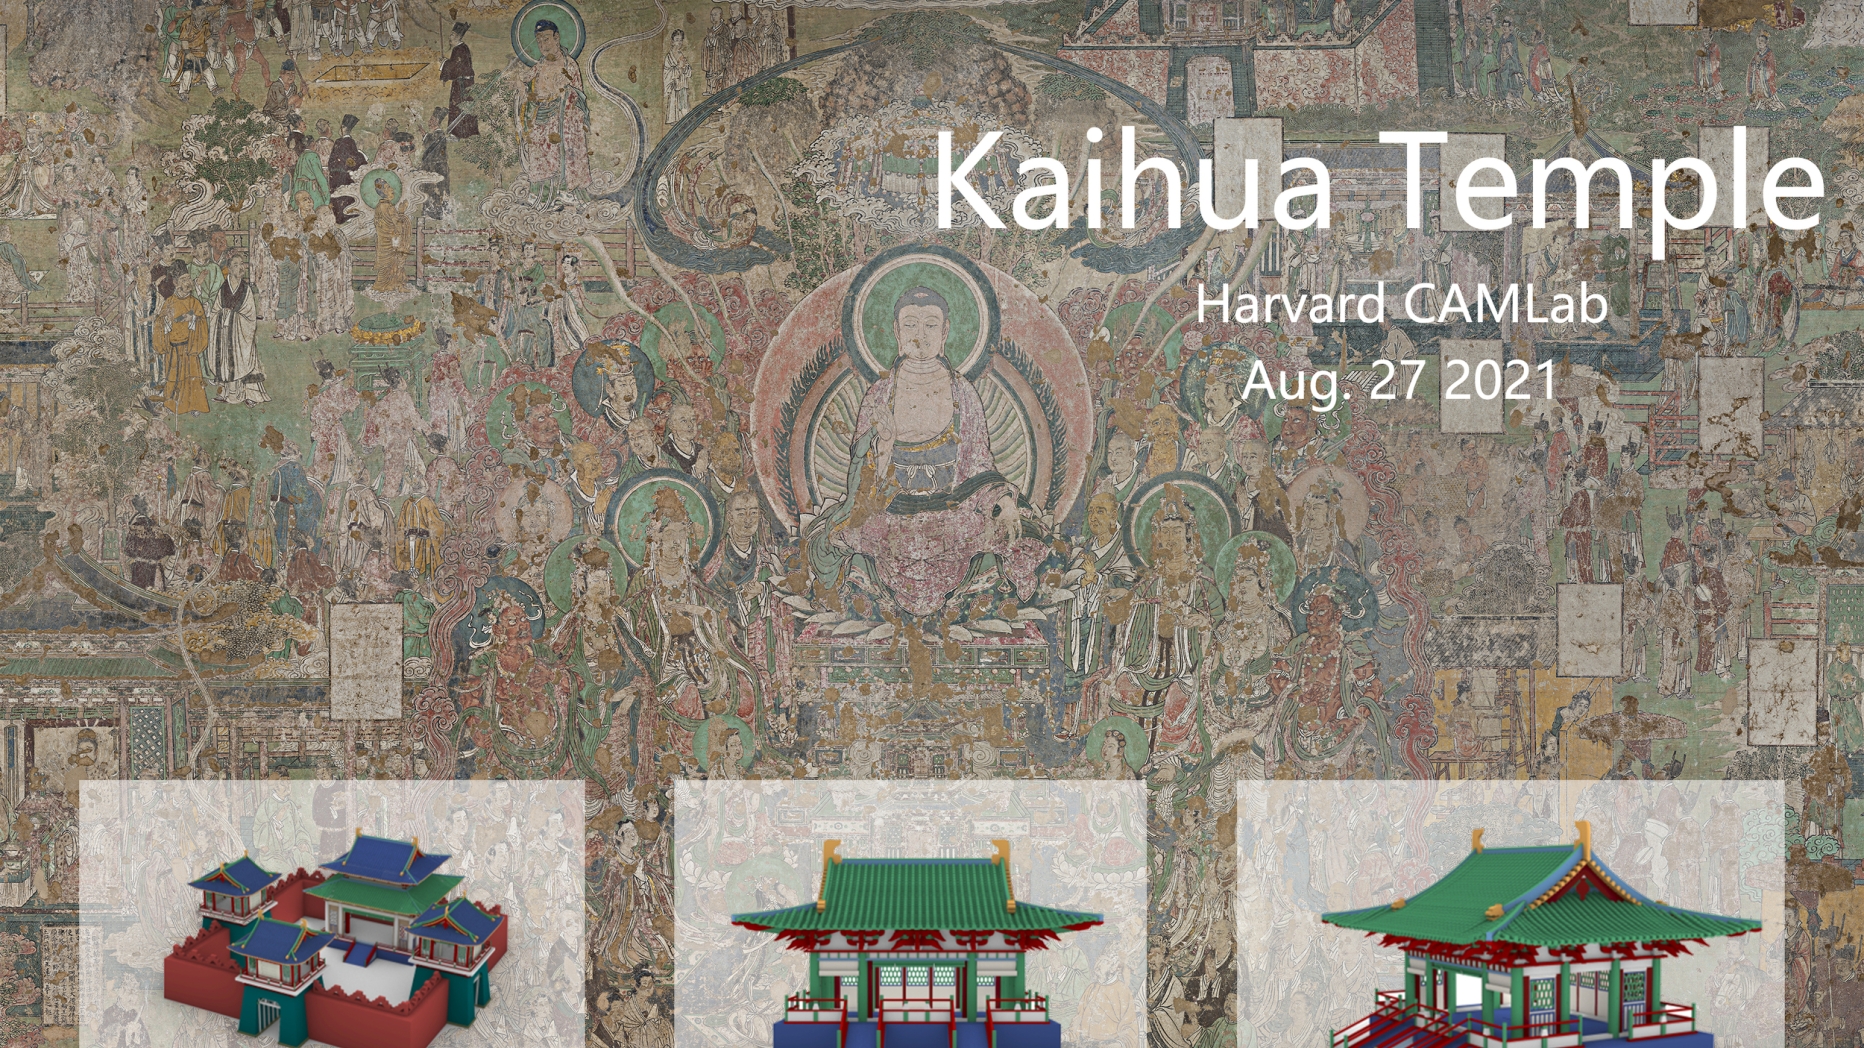 Interpretation and 3D modeling of the architectural images in the murals of Kaihua Temple